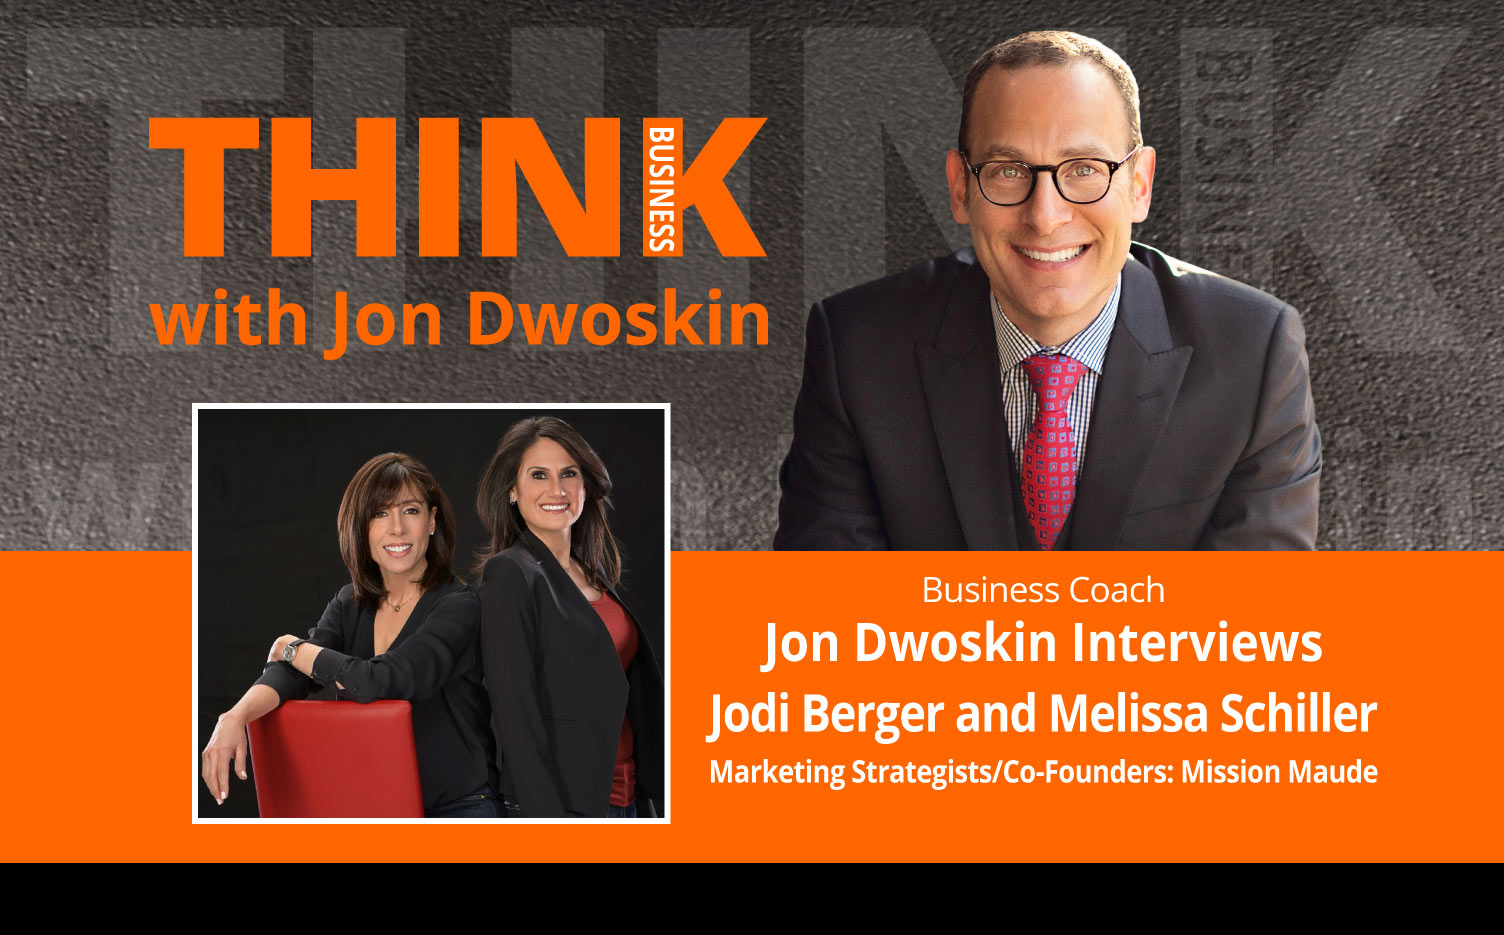 THINK Business Podcast: Jon Dwoskin Interviews Jodi Berger and Melissa Schiller, Marketing Strategists/Co-Founders: Mission Maude